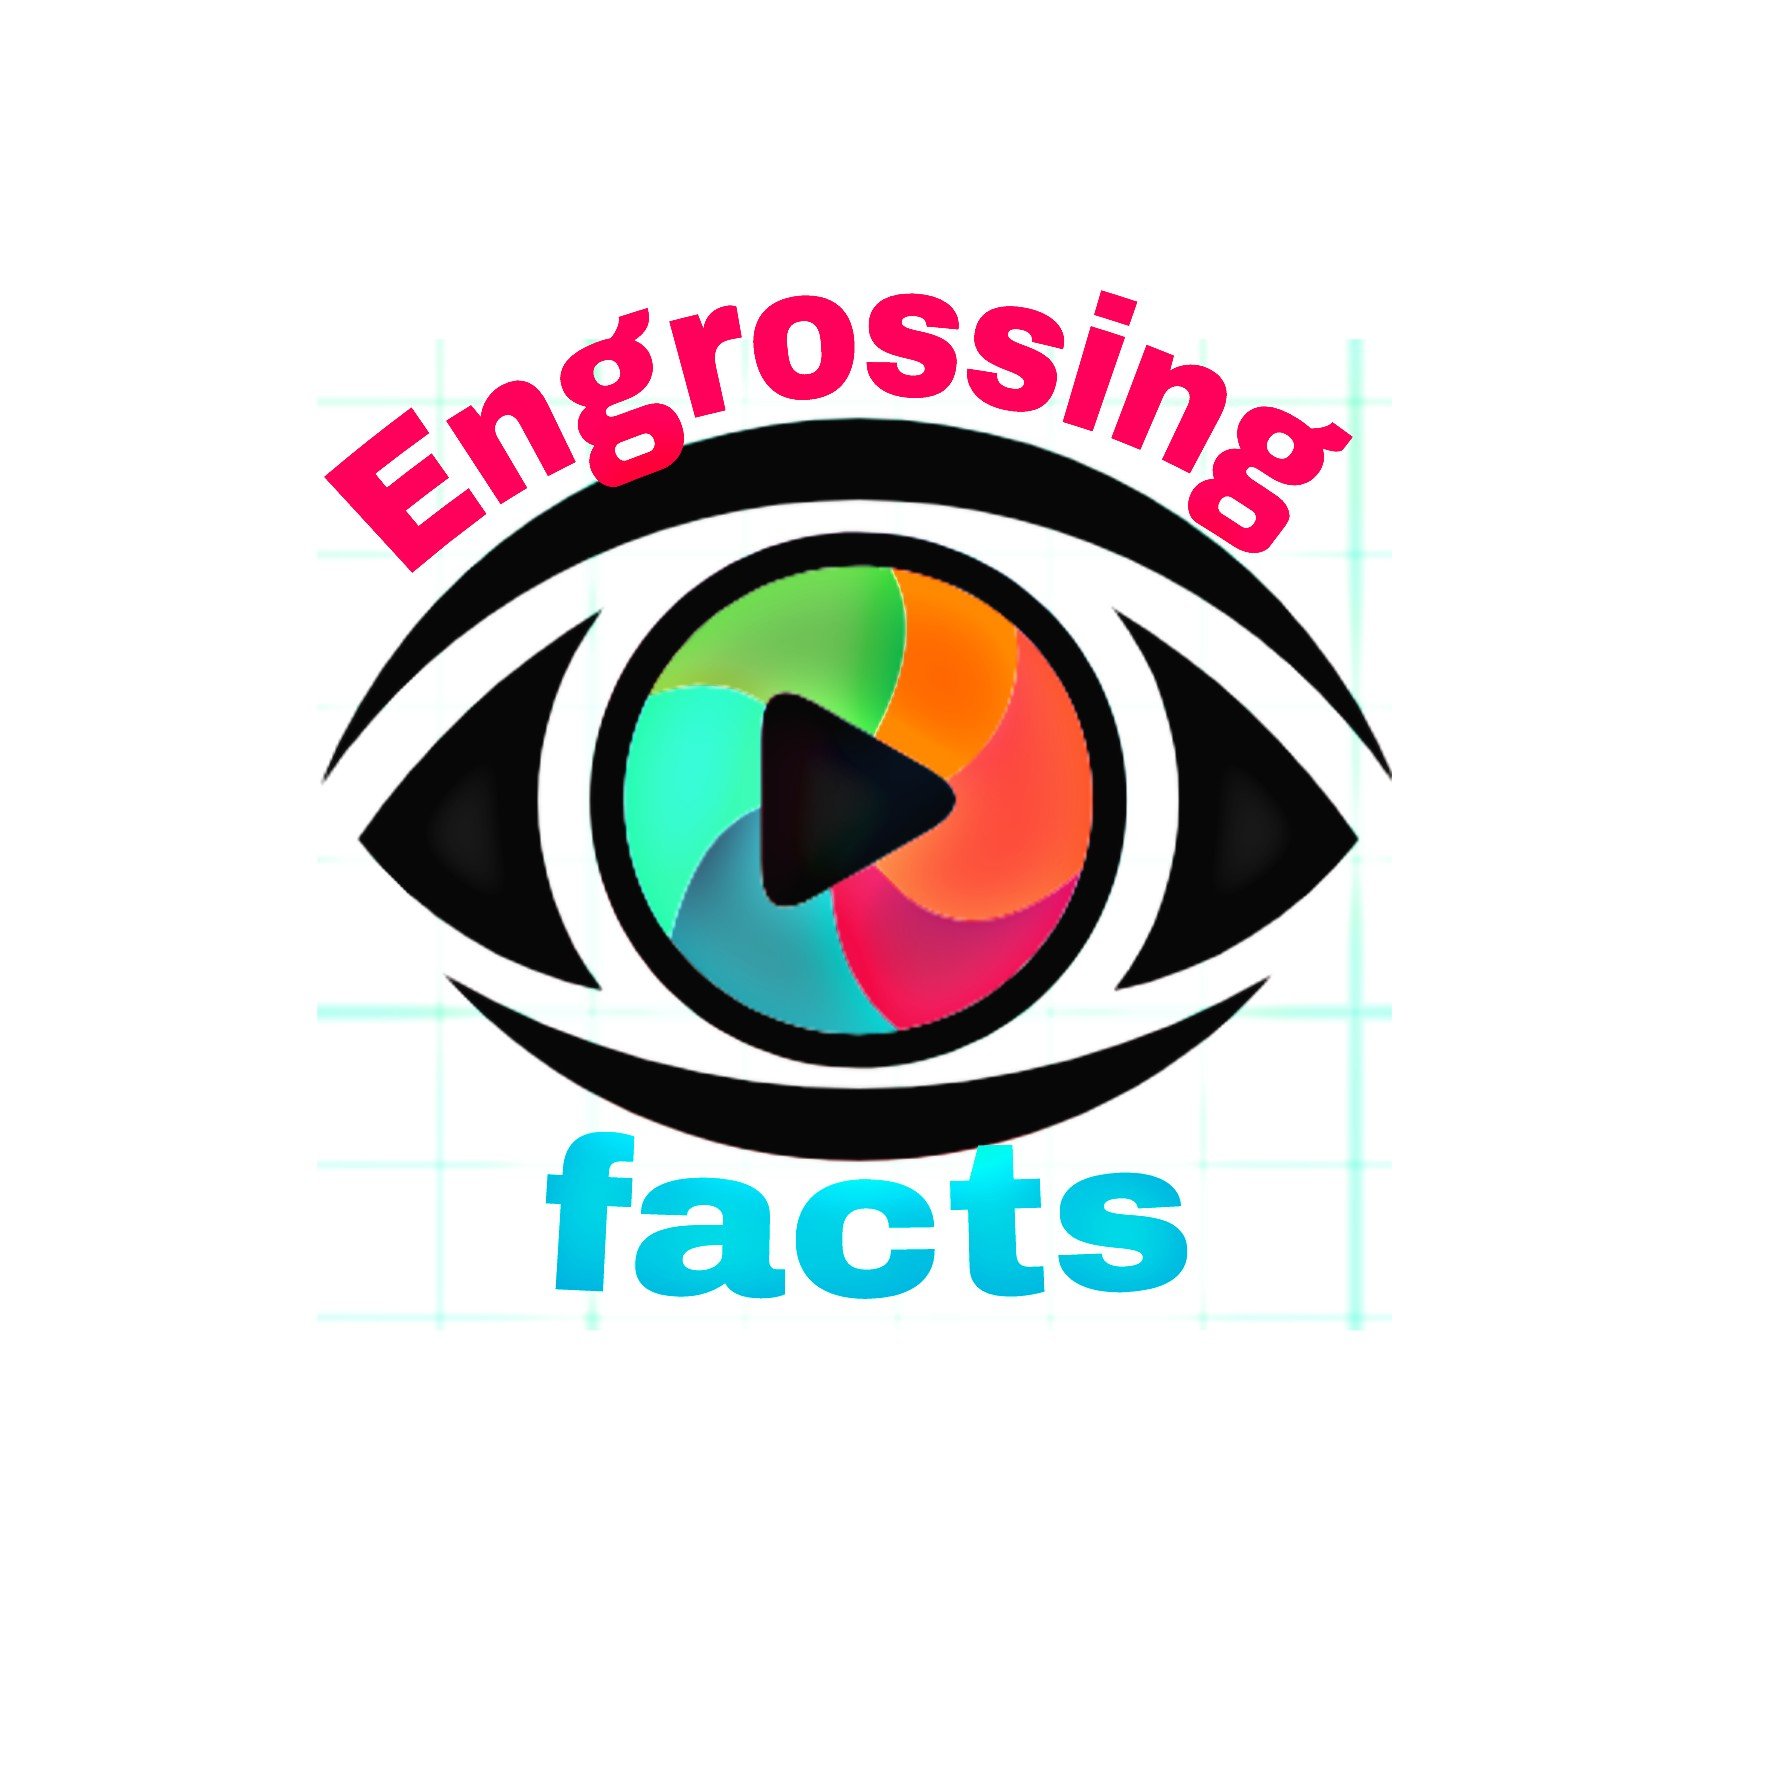 Subscribe our channel 👇👇👇😃 😃😃
Search #engrossingfacts on YouTube